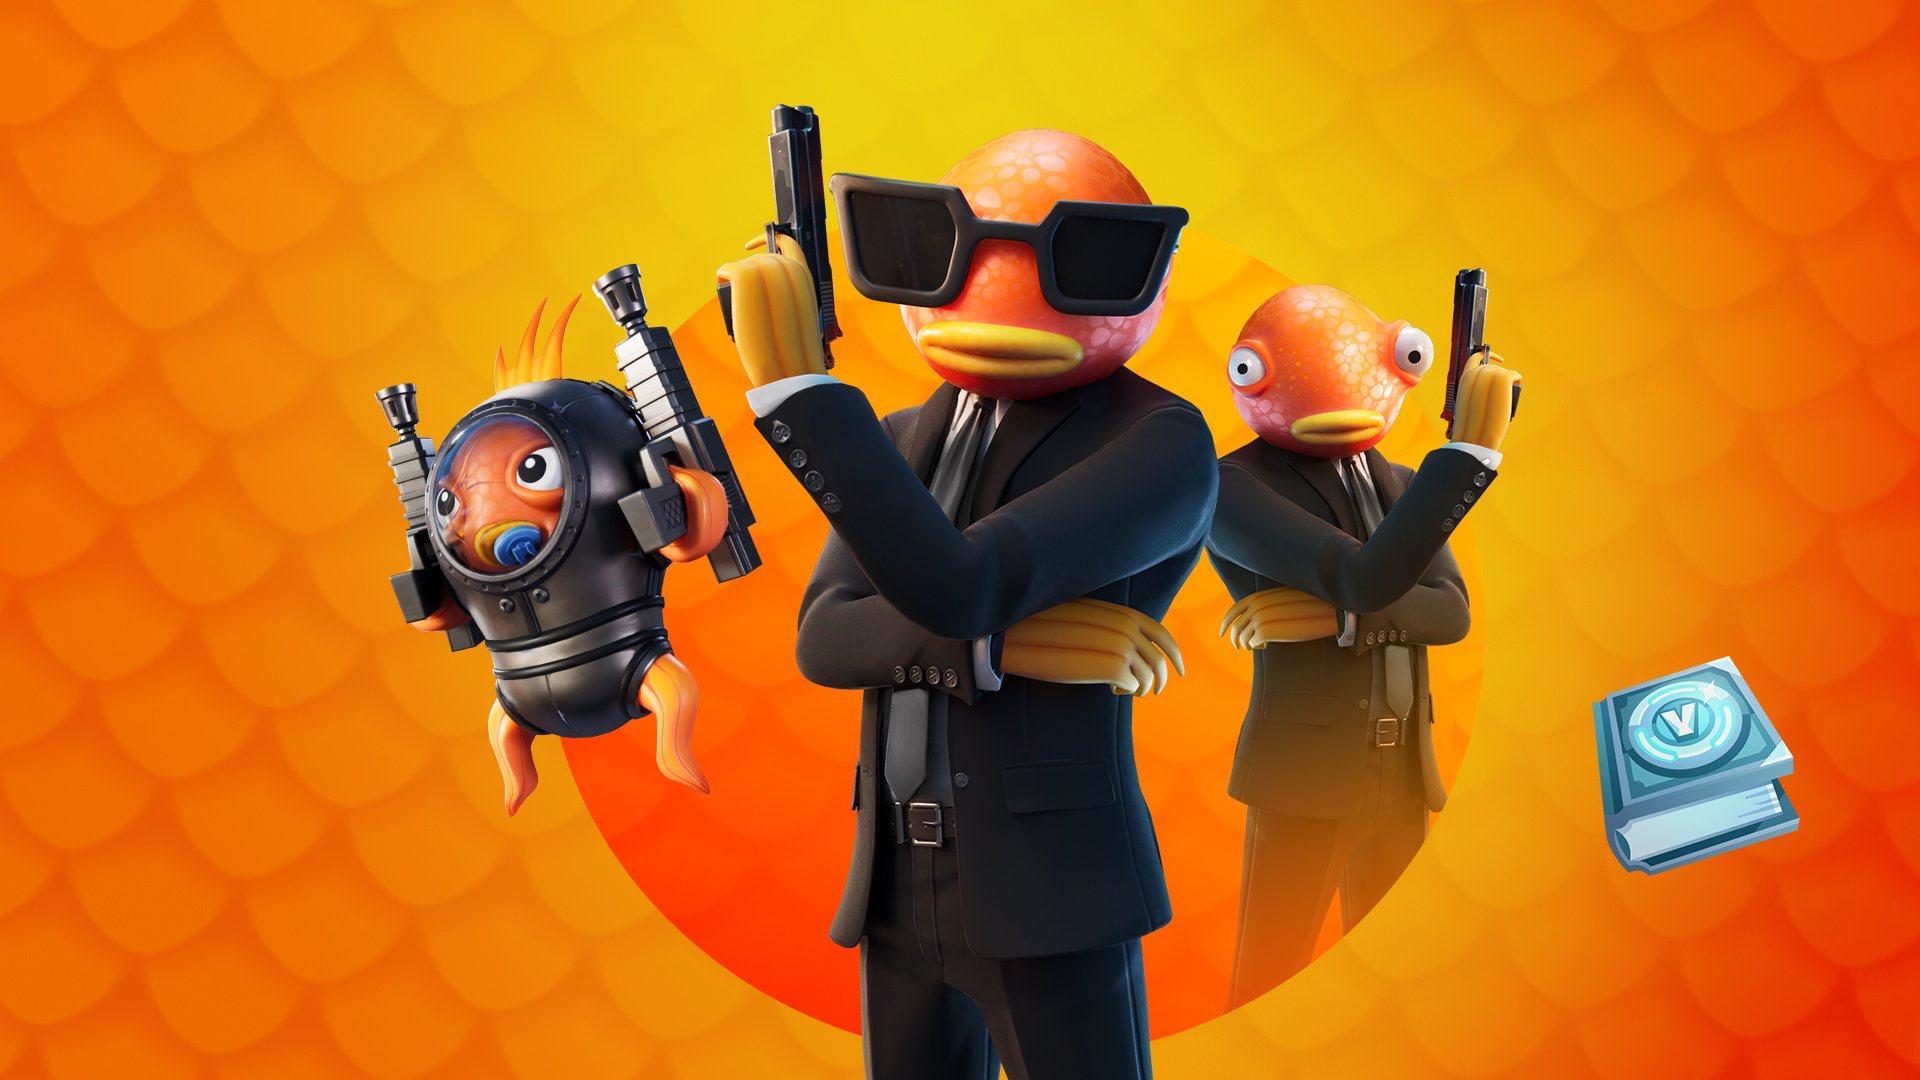 Fortnite Fishstick wallpaper by KyloSquadYT  Download on ZEDGE  65bc